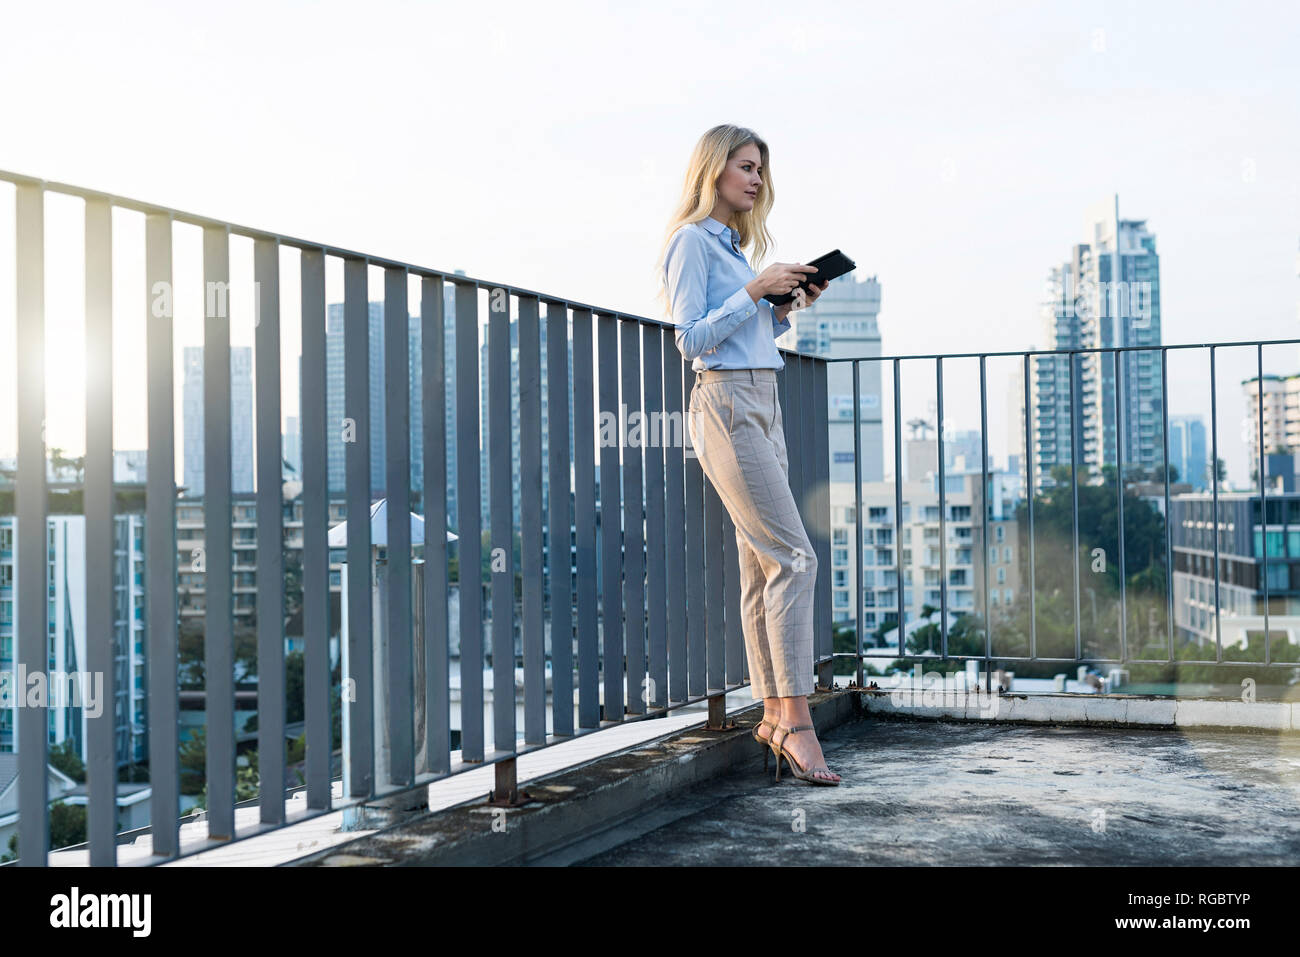 Blonde business woman leaning onto handrail holding tablet on city rooftop Stock Photo